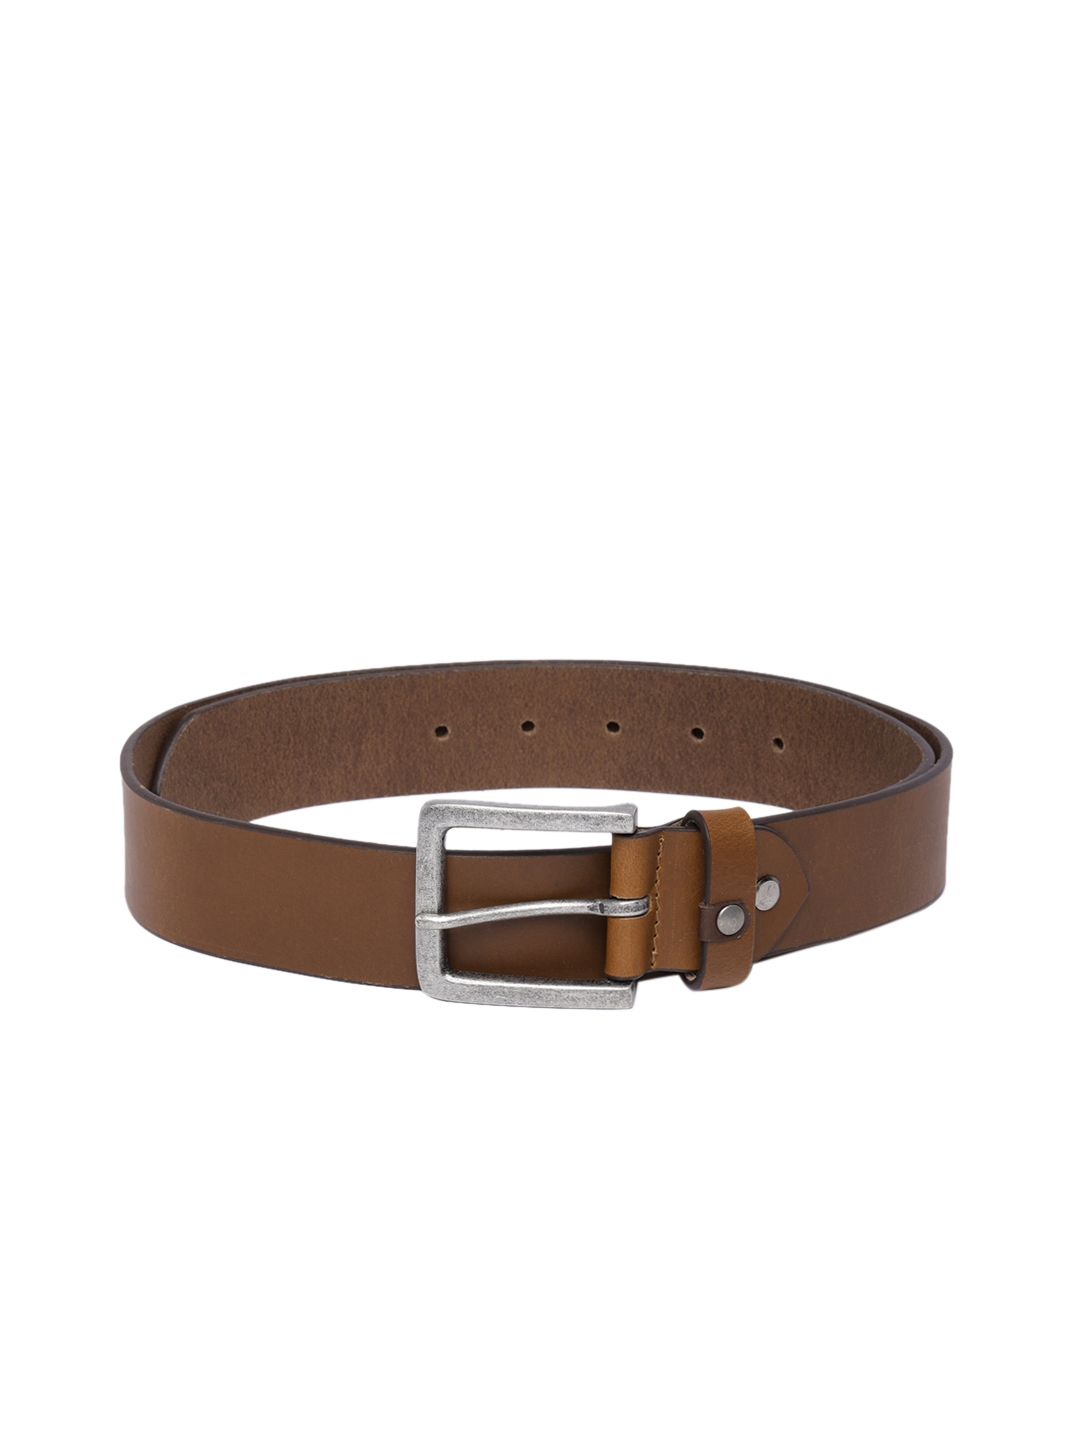 Buy The Roadster Lifestyle Co Men Tan Brown Solid Leather Belt - Belts ...